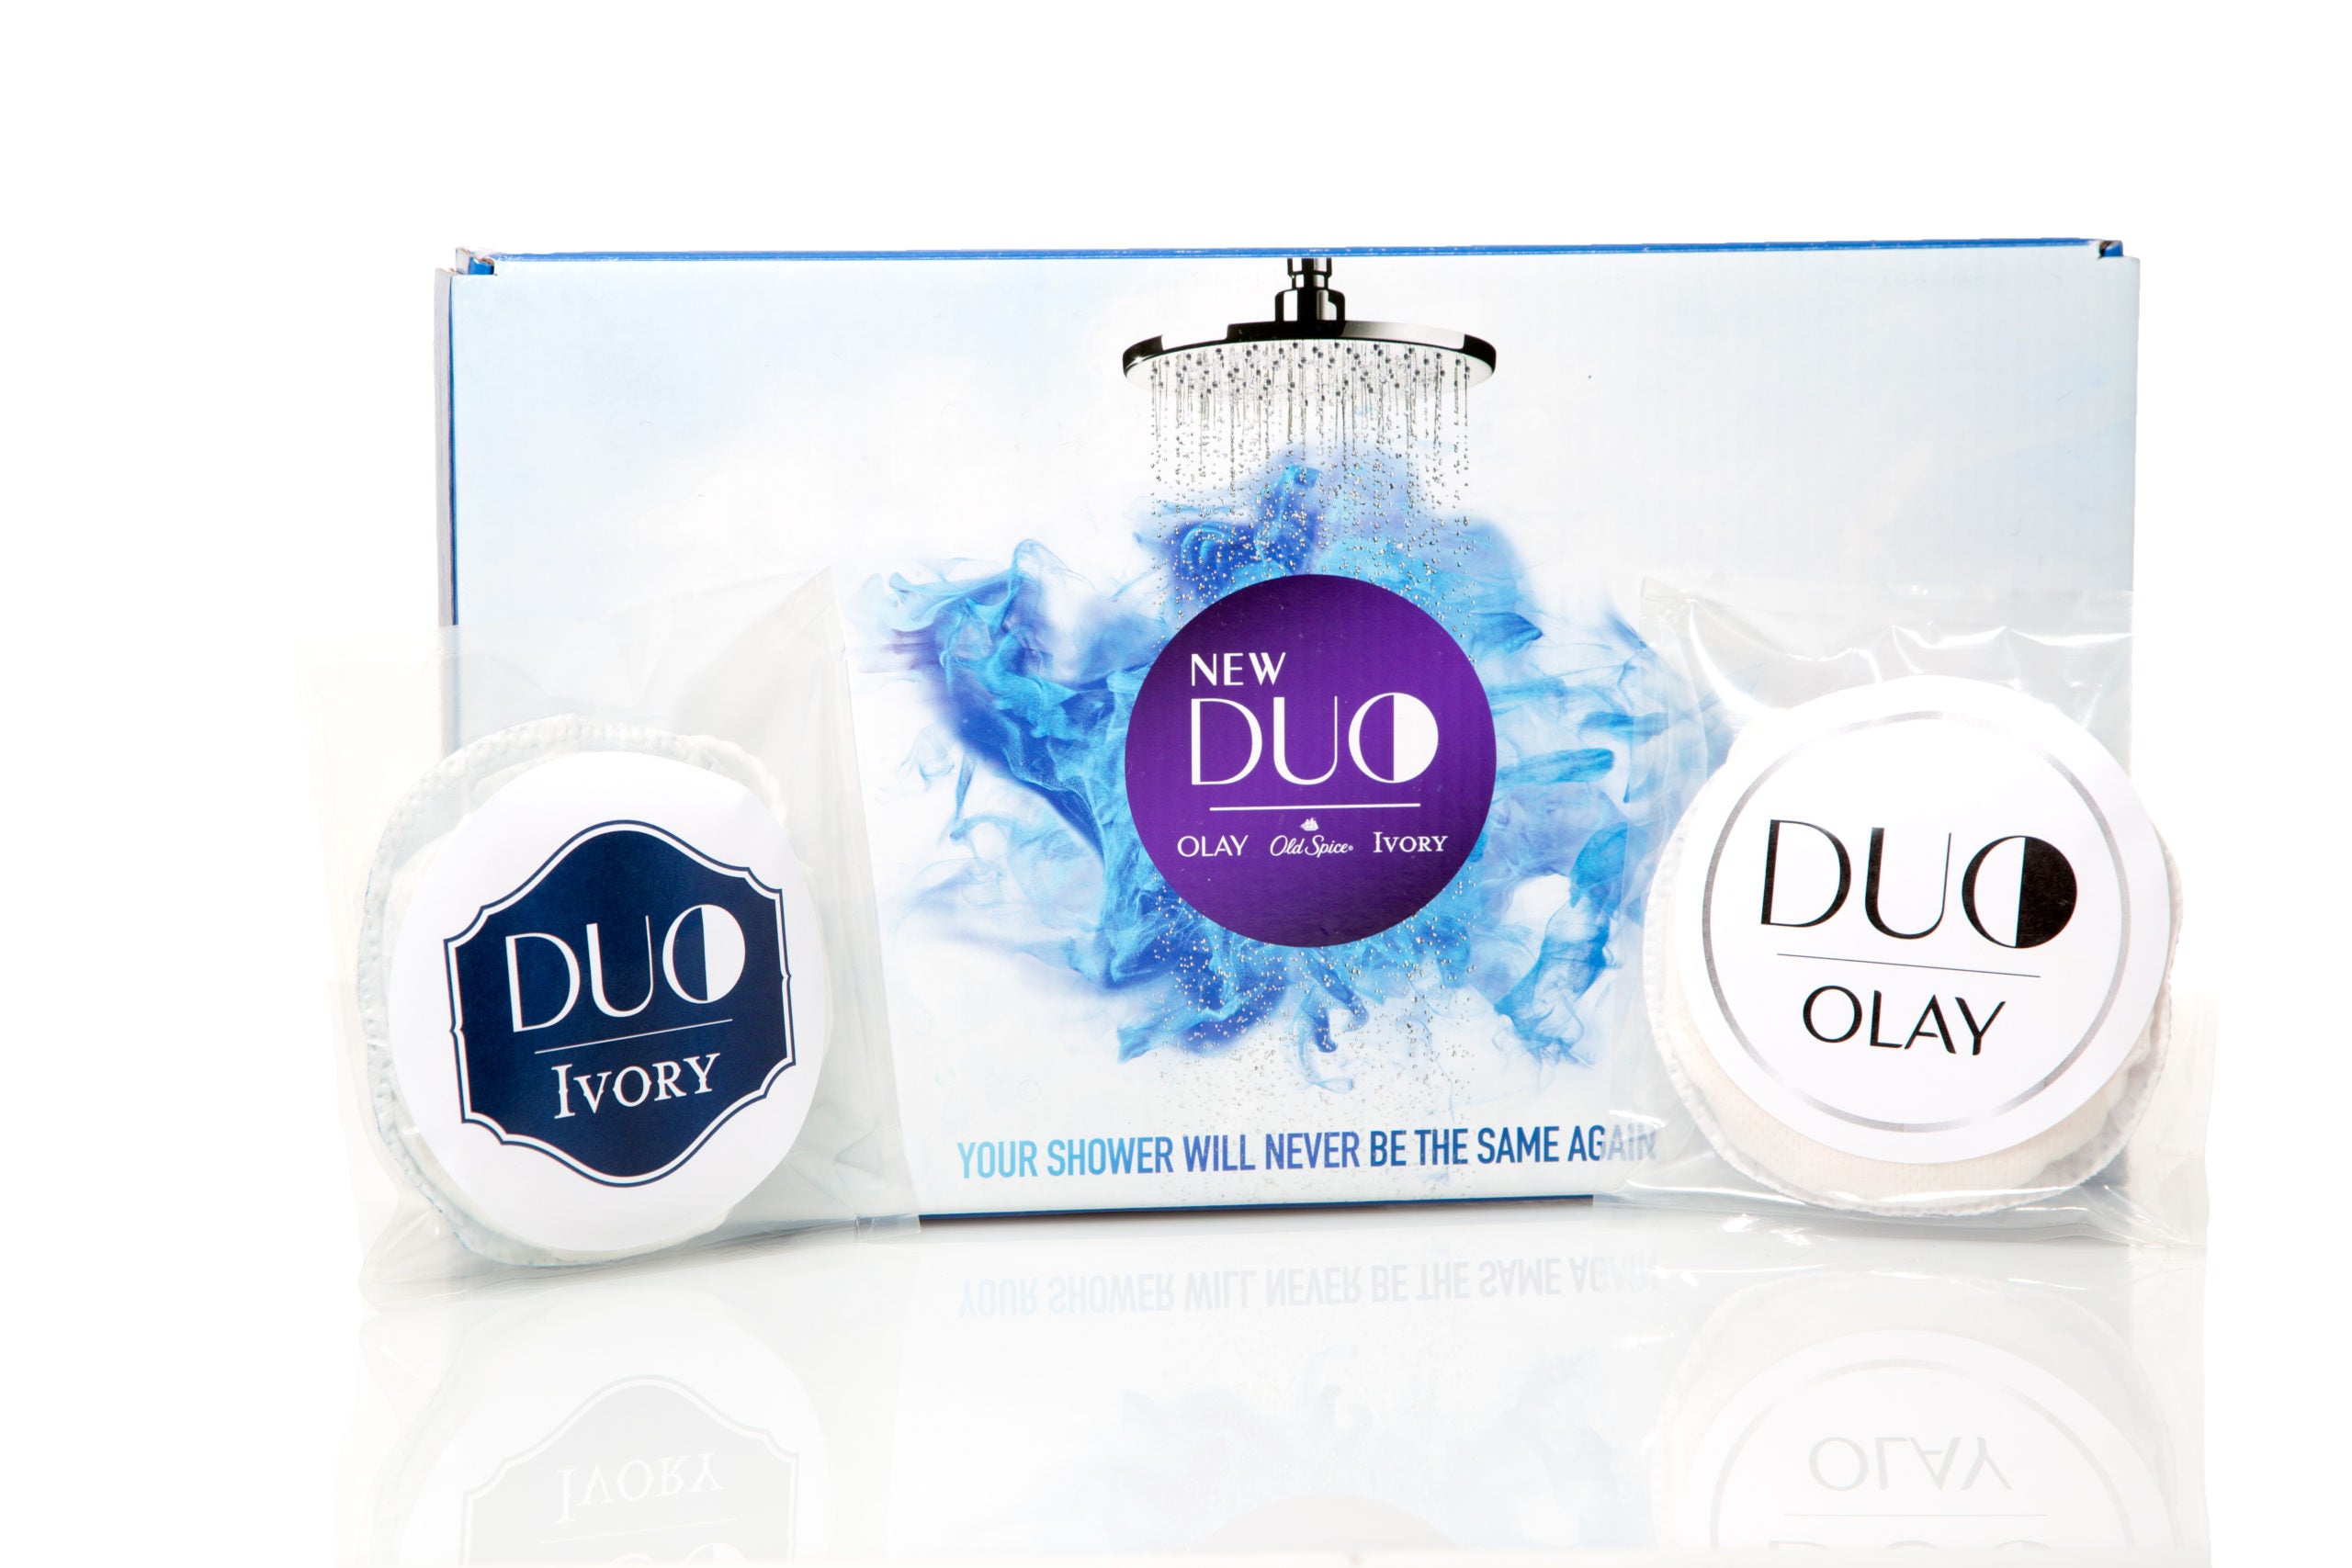 Skincare Review, Ingredients, Trend 2017, 2018: Olay Duo Dual- Sided Body Cleanser